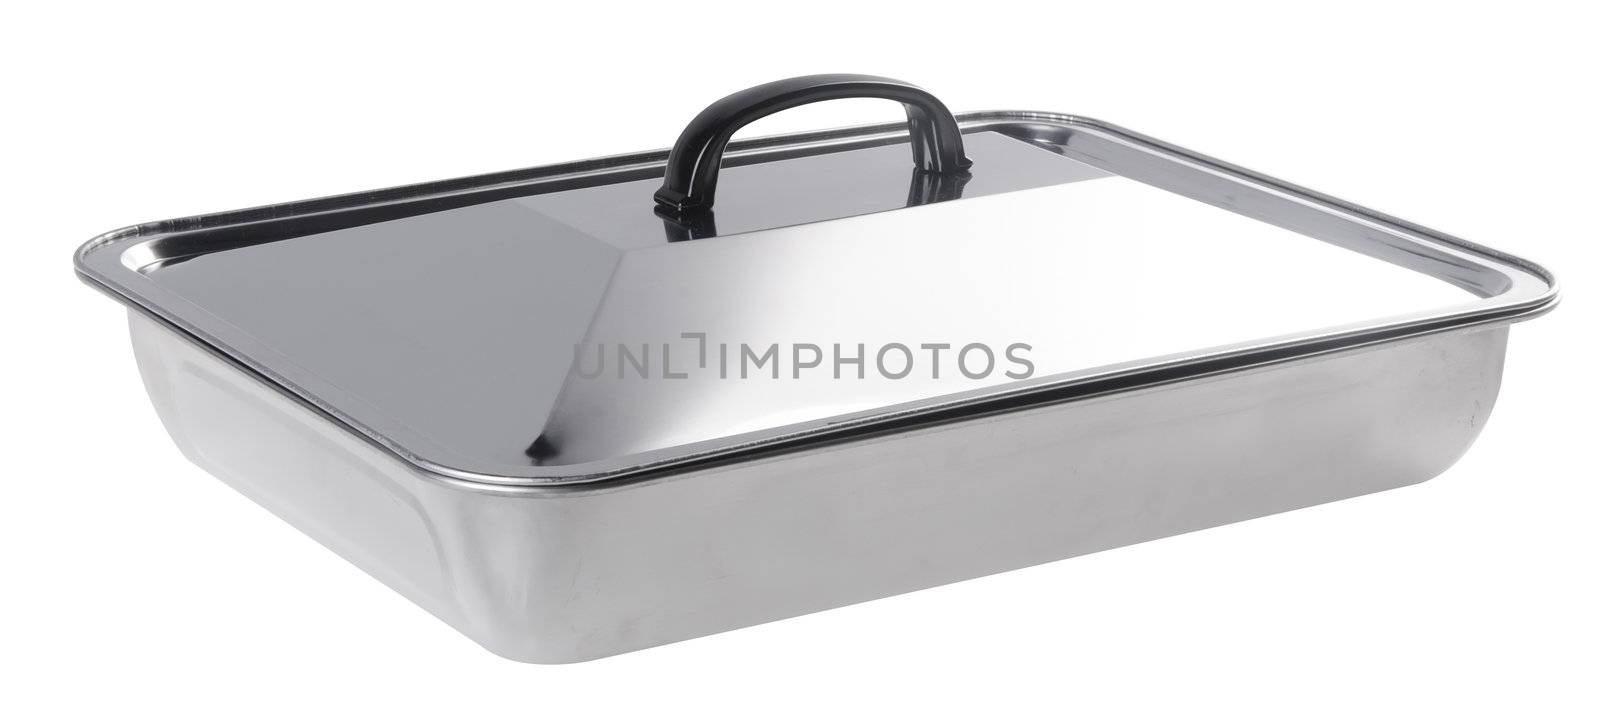 food containers, stainless steel food containers on white background